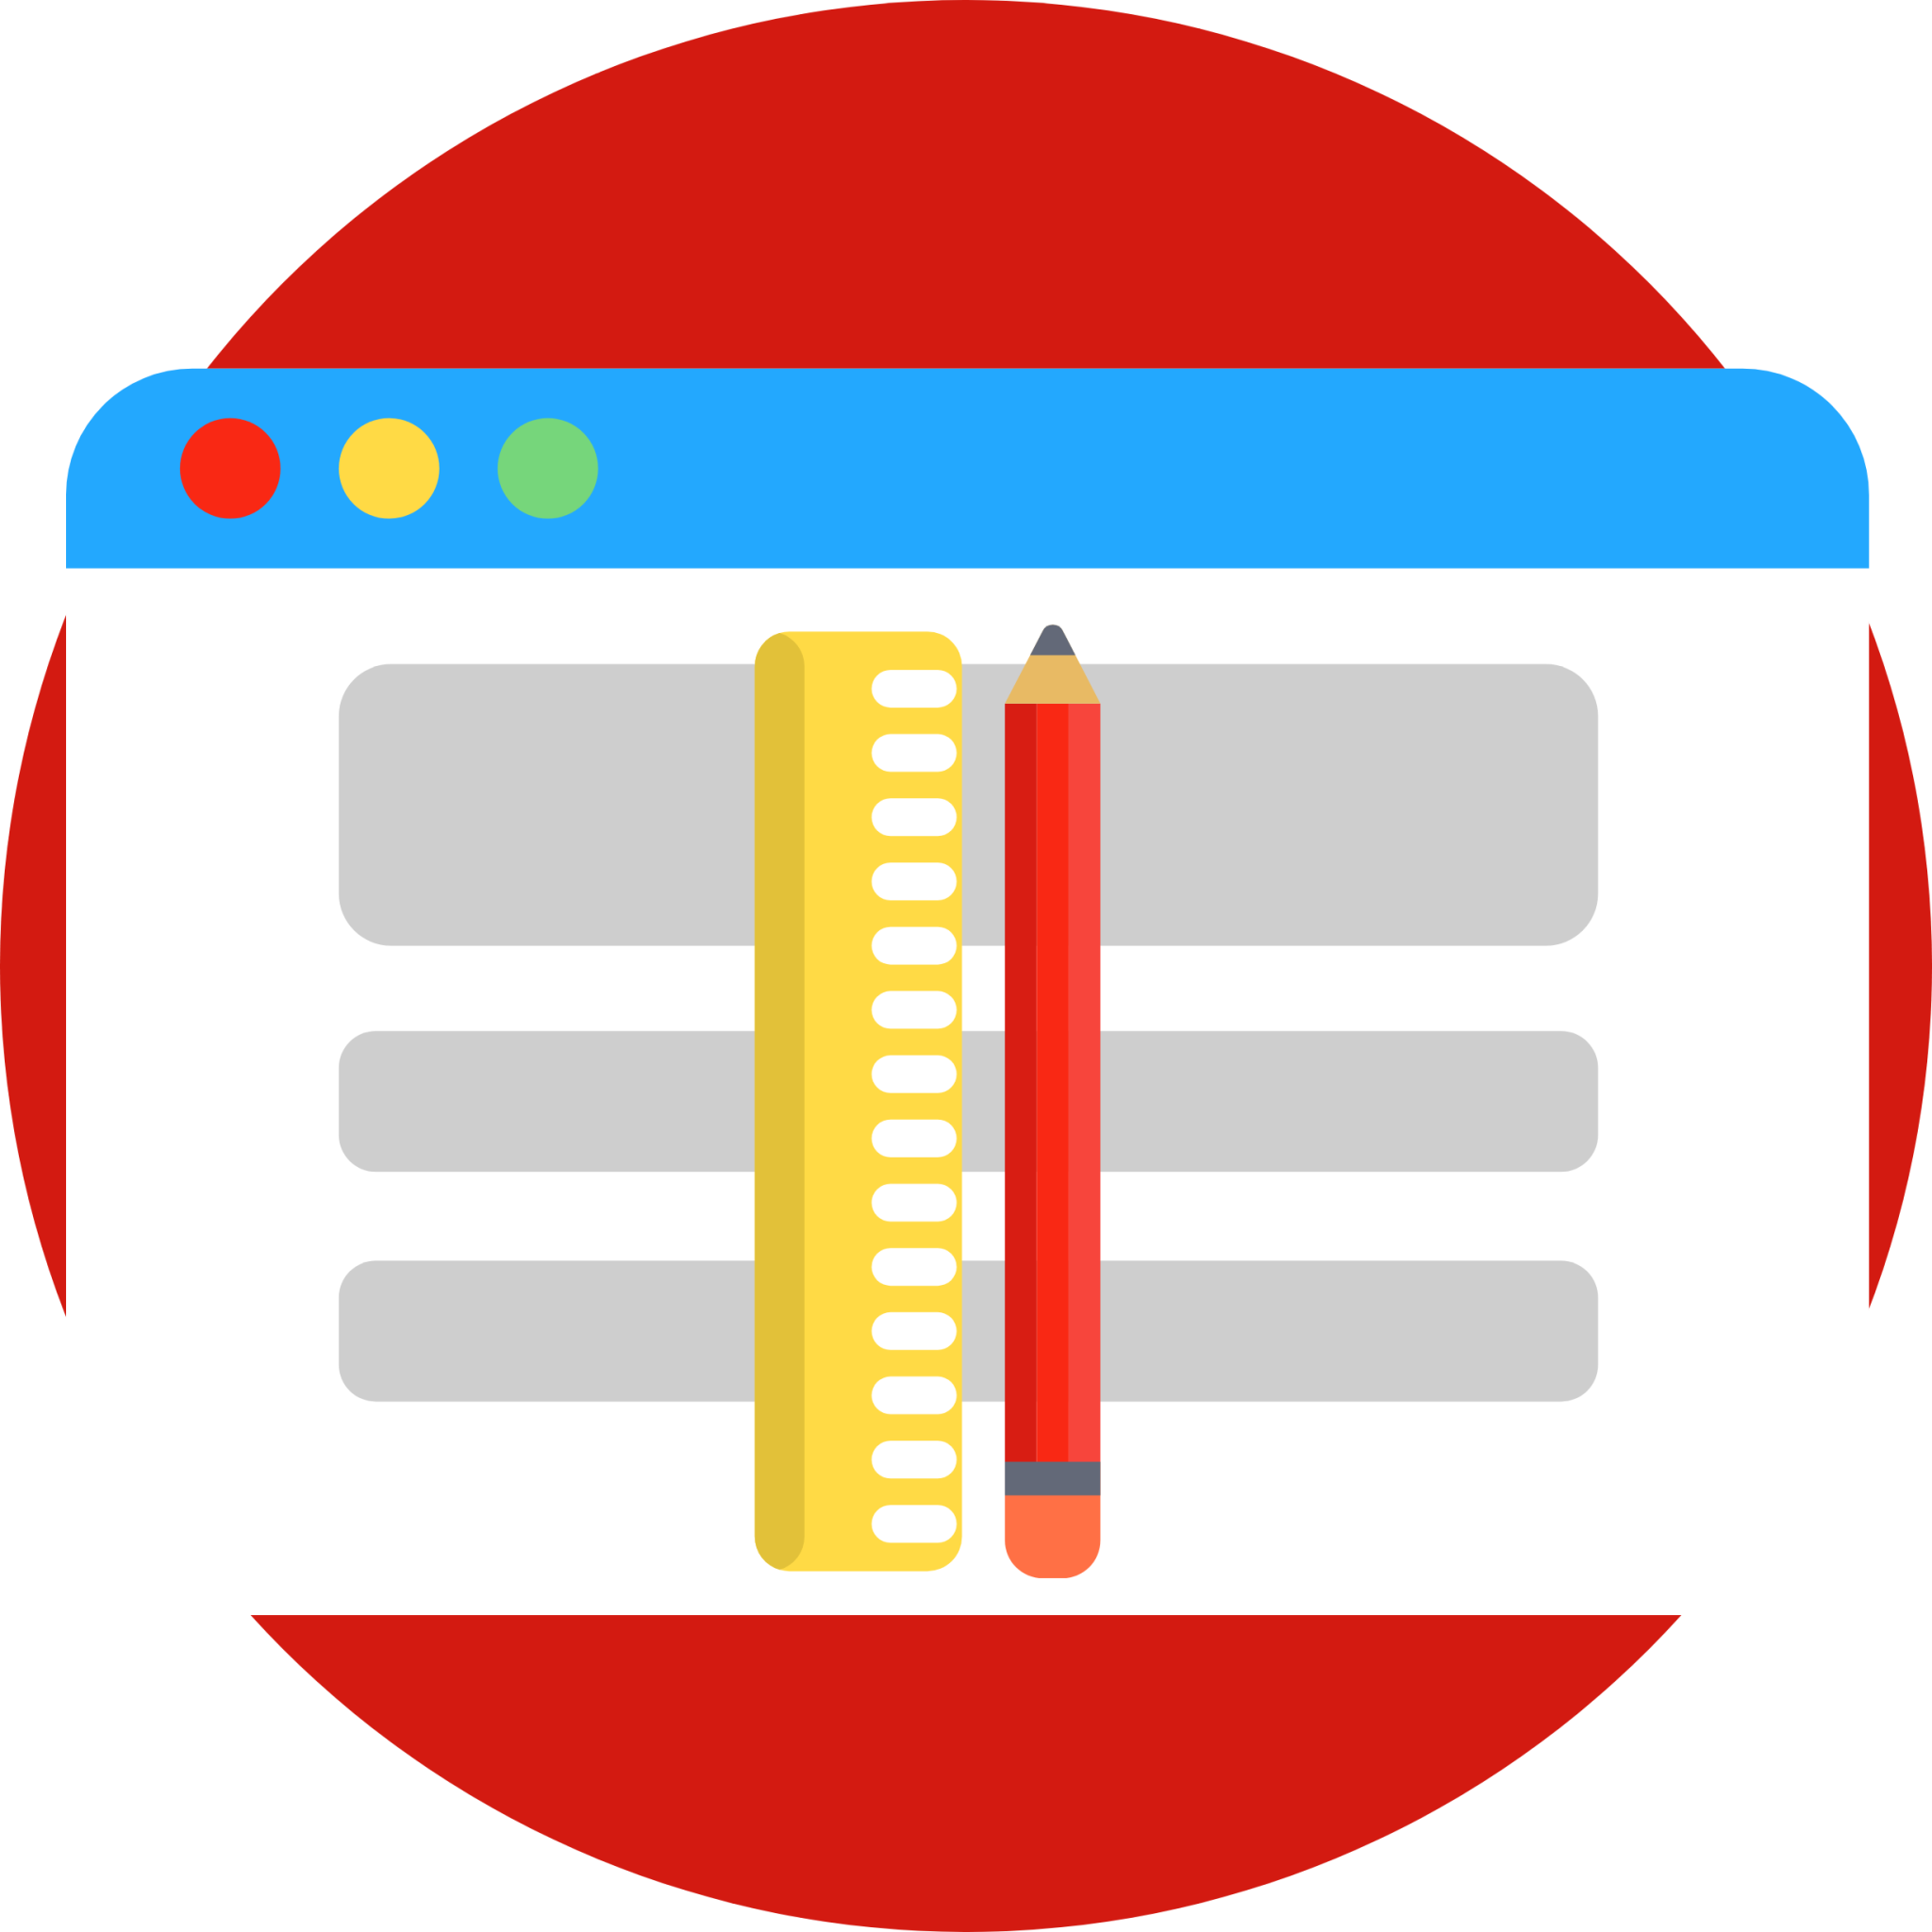 measure icon png